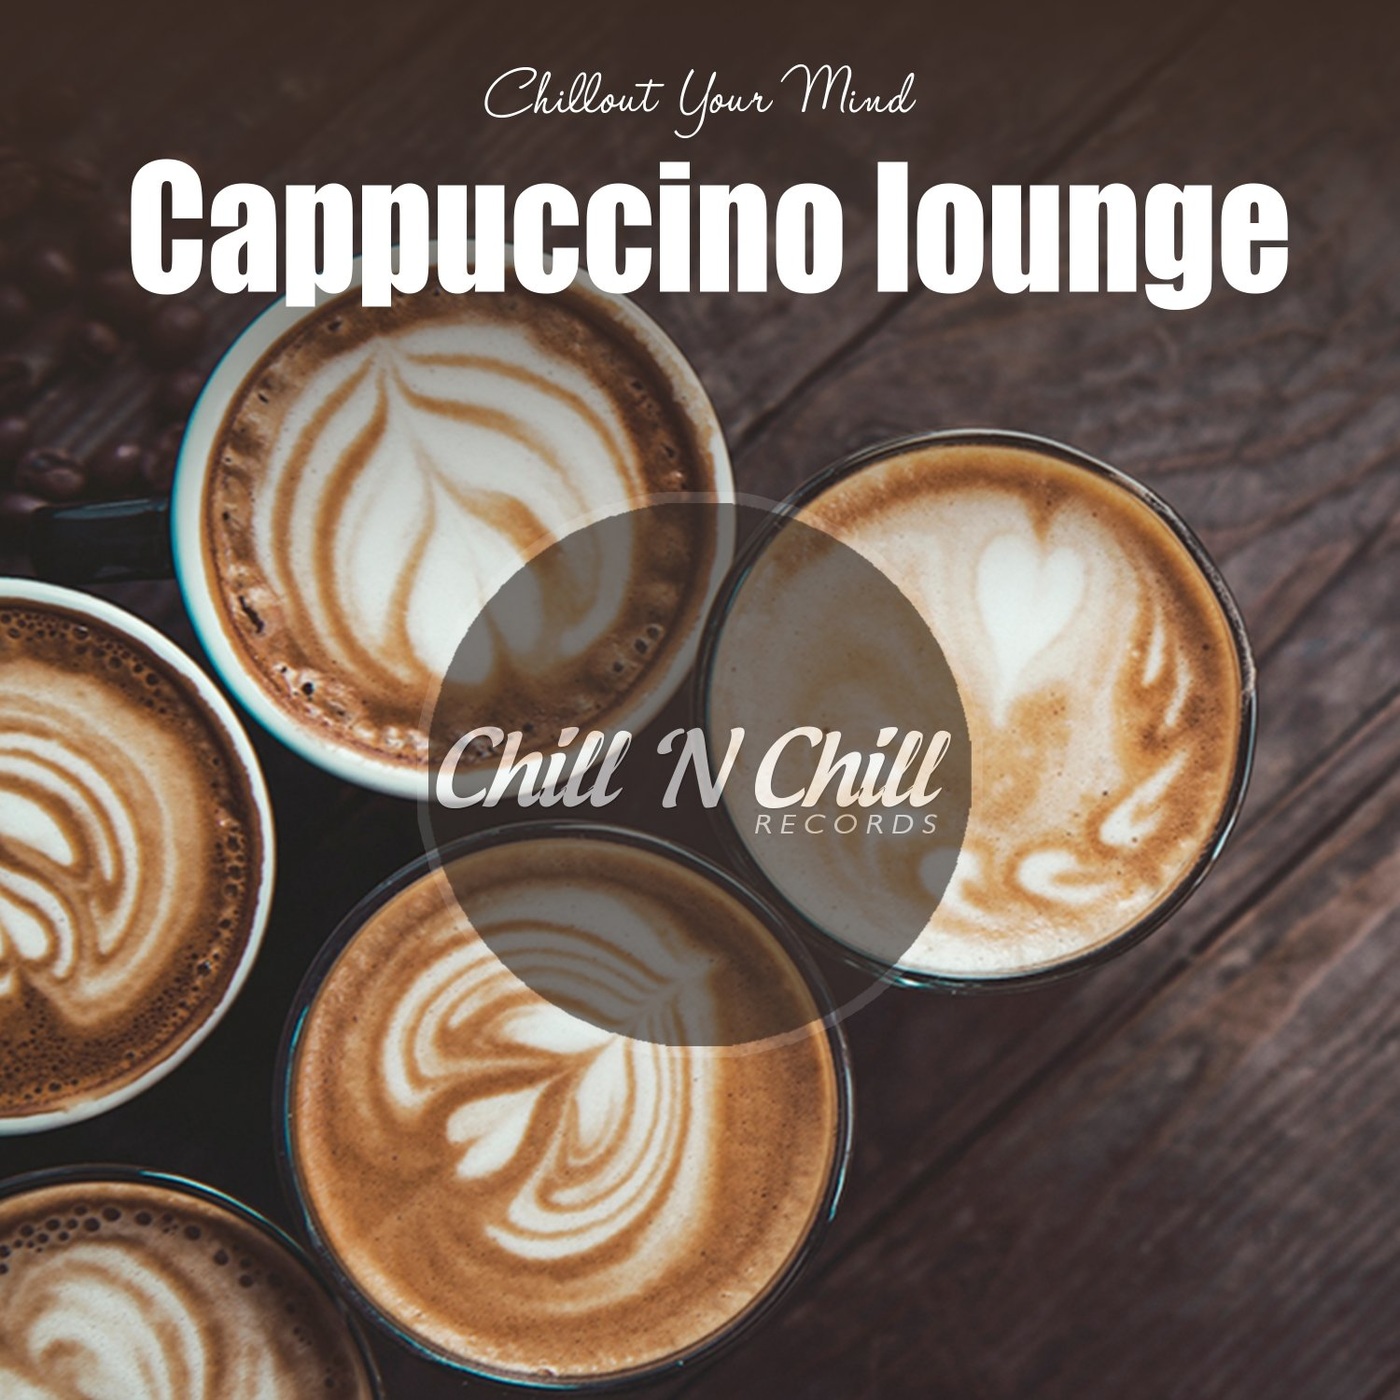 chill n chill records《cappuccino lounge：chillout your mind》cd级